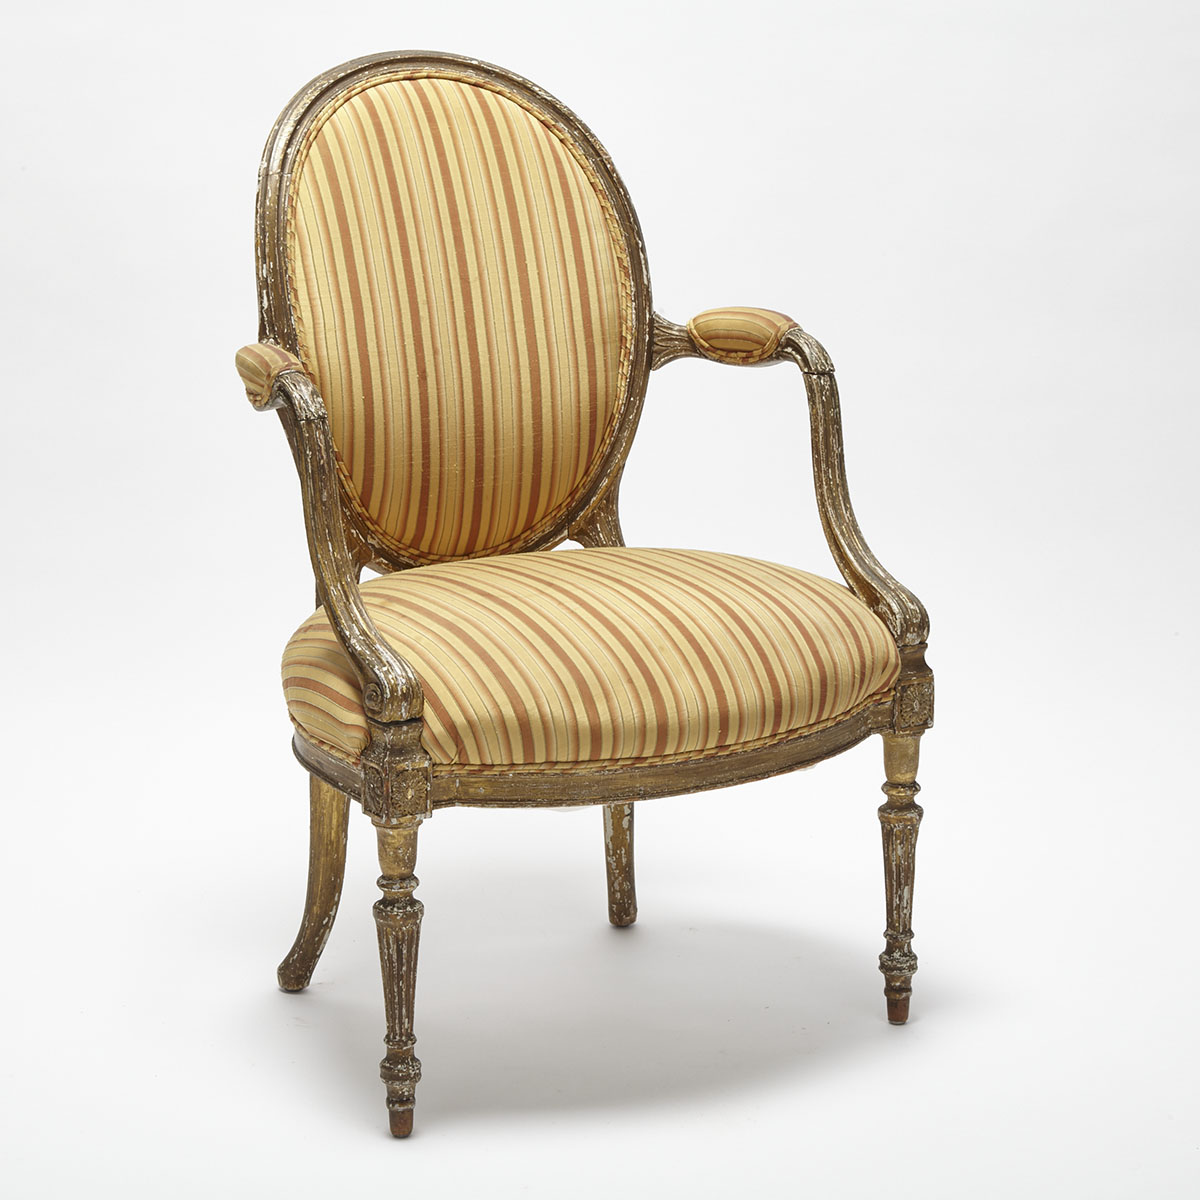 Louis XVI Carved Giltwood Fauteuil, c.1770